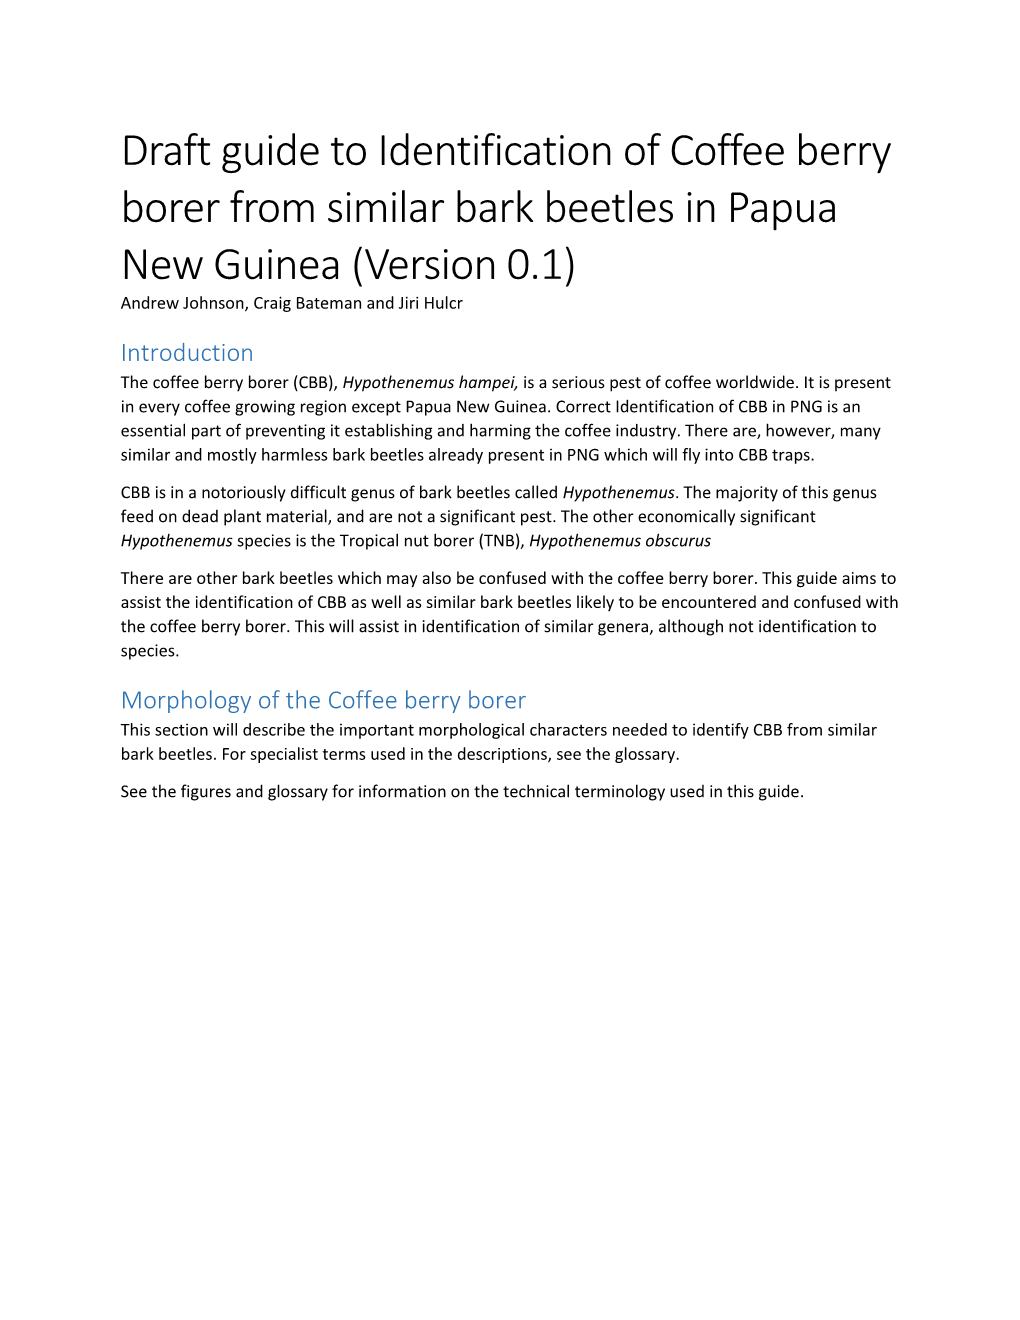 Draft Guide to Identification of Coffee Berry Borer from Similar Bark Beetles in Papua New Guinea (Version 0.1) Andrew Johnson, Craig Bateman and Jiri Hulcr